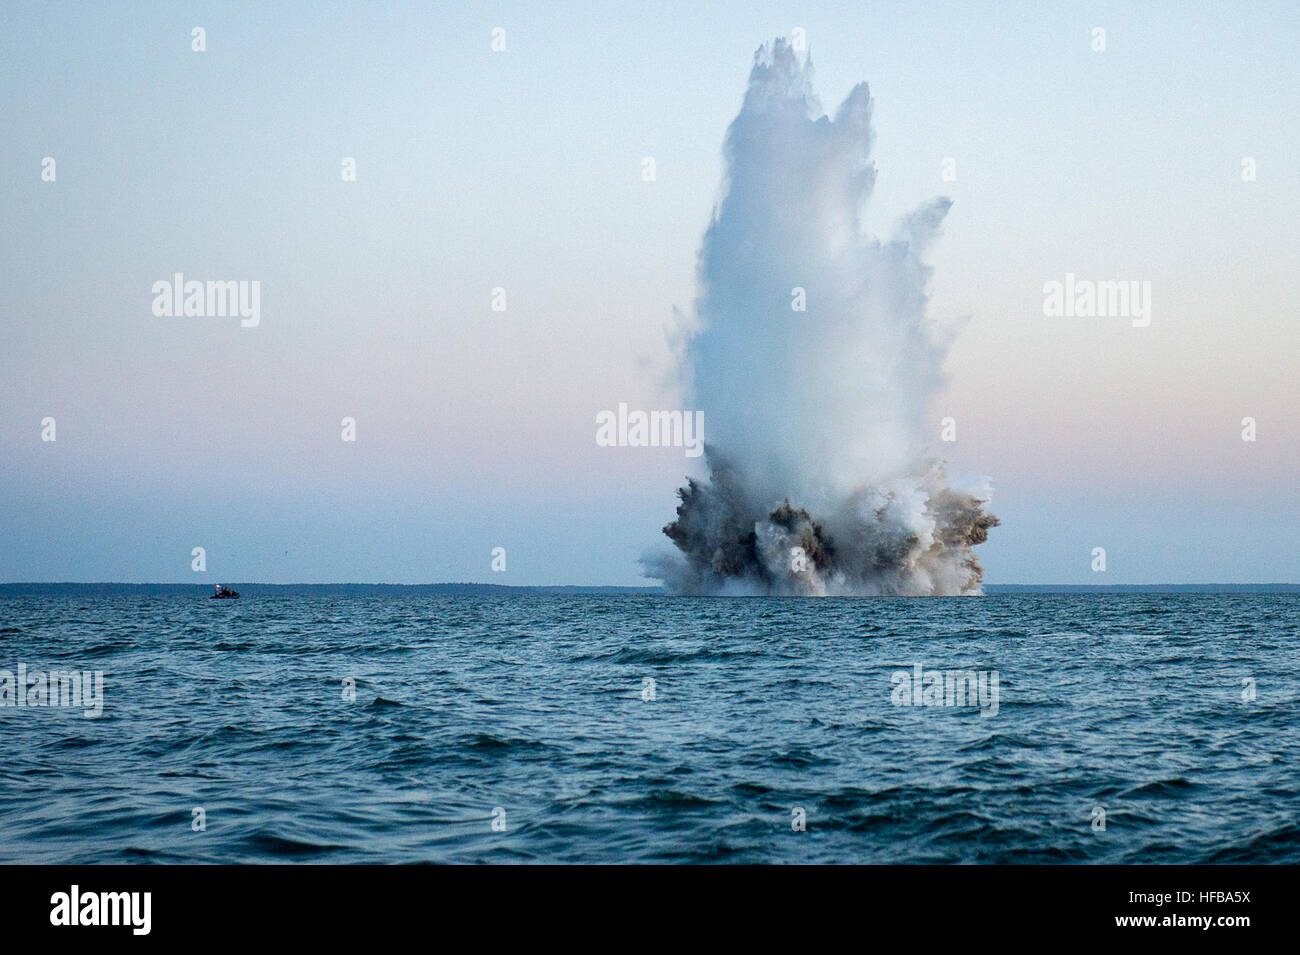 150525-N-RA981-223  BALTIC SEA (May 25, 2015) Members of a Latvian explosive ordnance disposal team use demolition charges to detonate a World War II-era German bottom-mine while conducting mine countermeasures operations in the Baltic Sea off the coast of Estonia during Exercise Open Spirit 2015. EODMU-8 is working in conjunction with explosive ordnance disposal teams from Estonia, Germany, Latvia, Lithuania, Poland and Sweden to dispose of unexploded ordnance originating from World War II. (U.S. Navy photo by Mass Communication Specialist 2nd Class Patrick A. Ratcliff/Released) Explosion of  Stock Photo